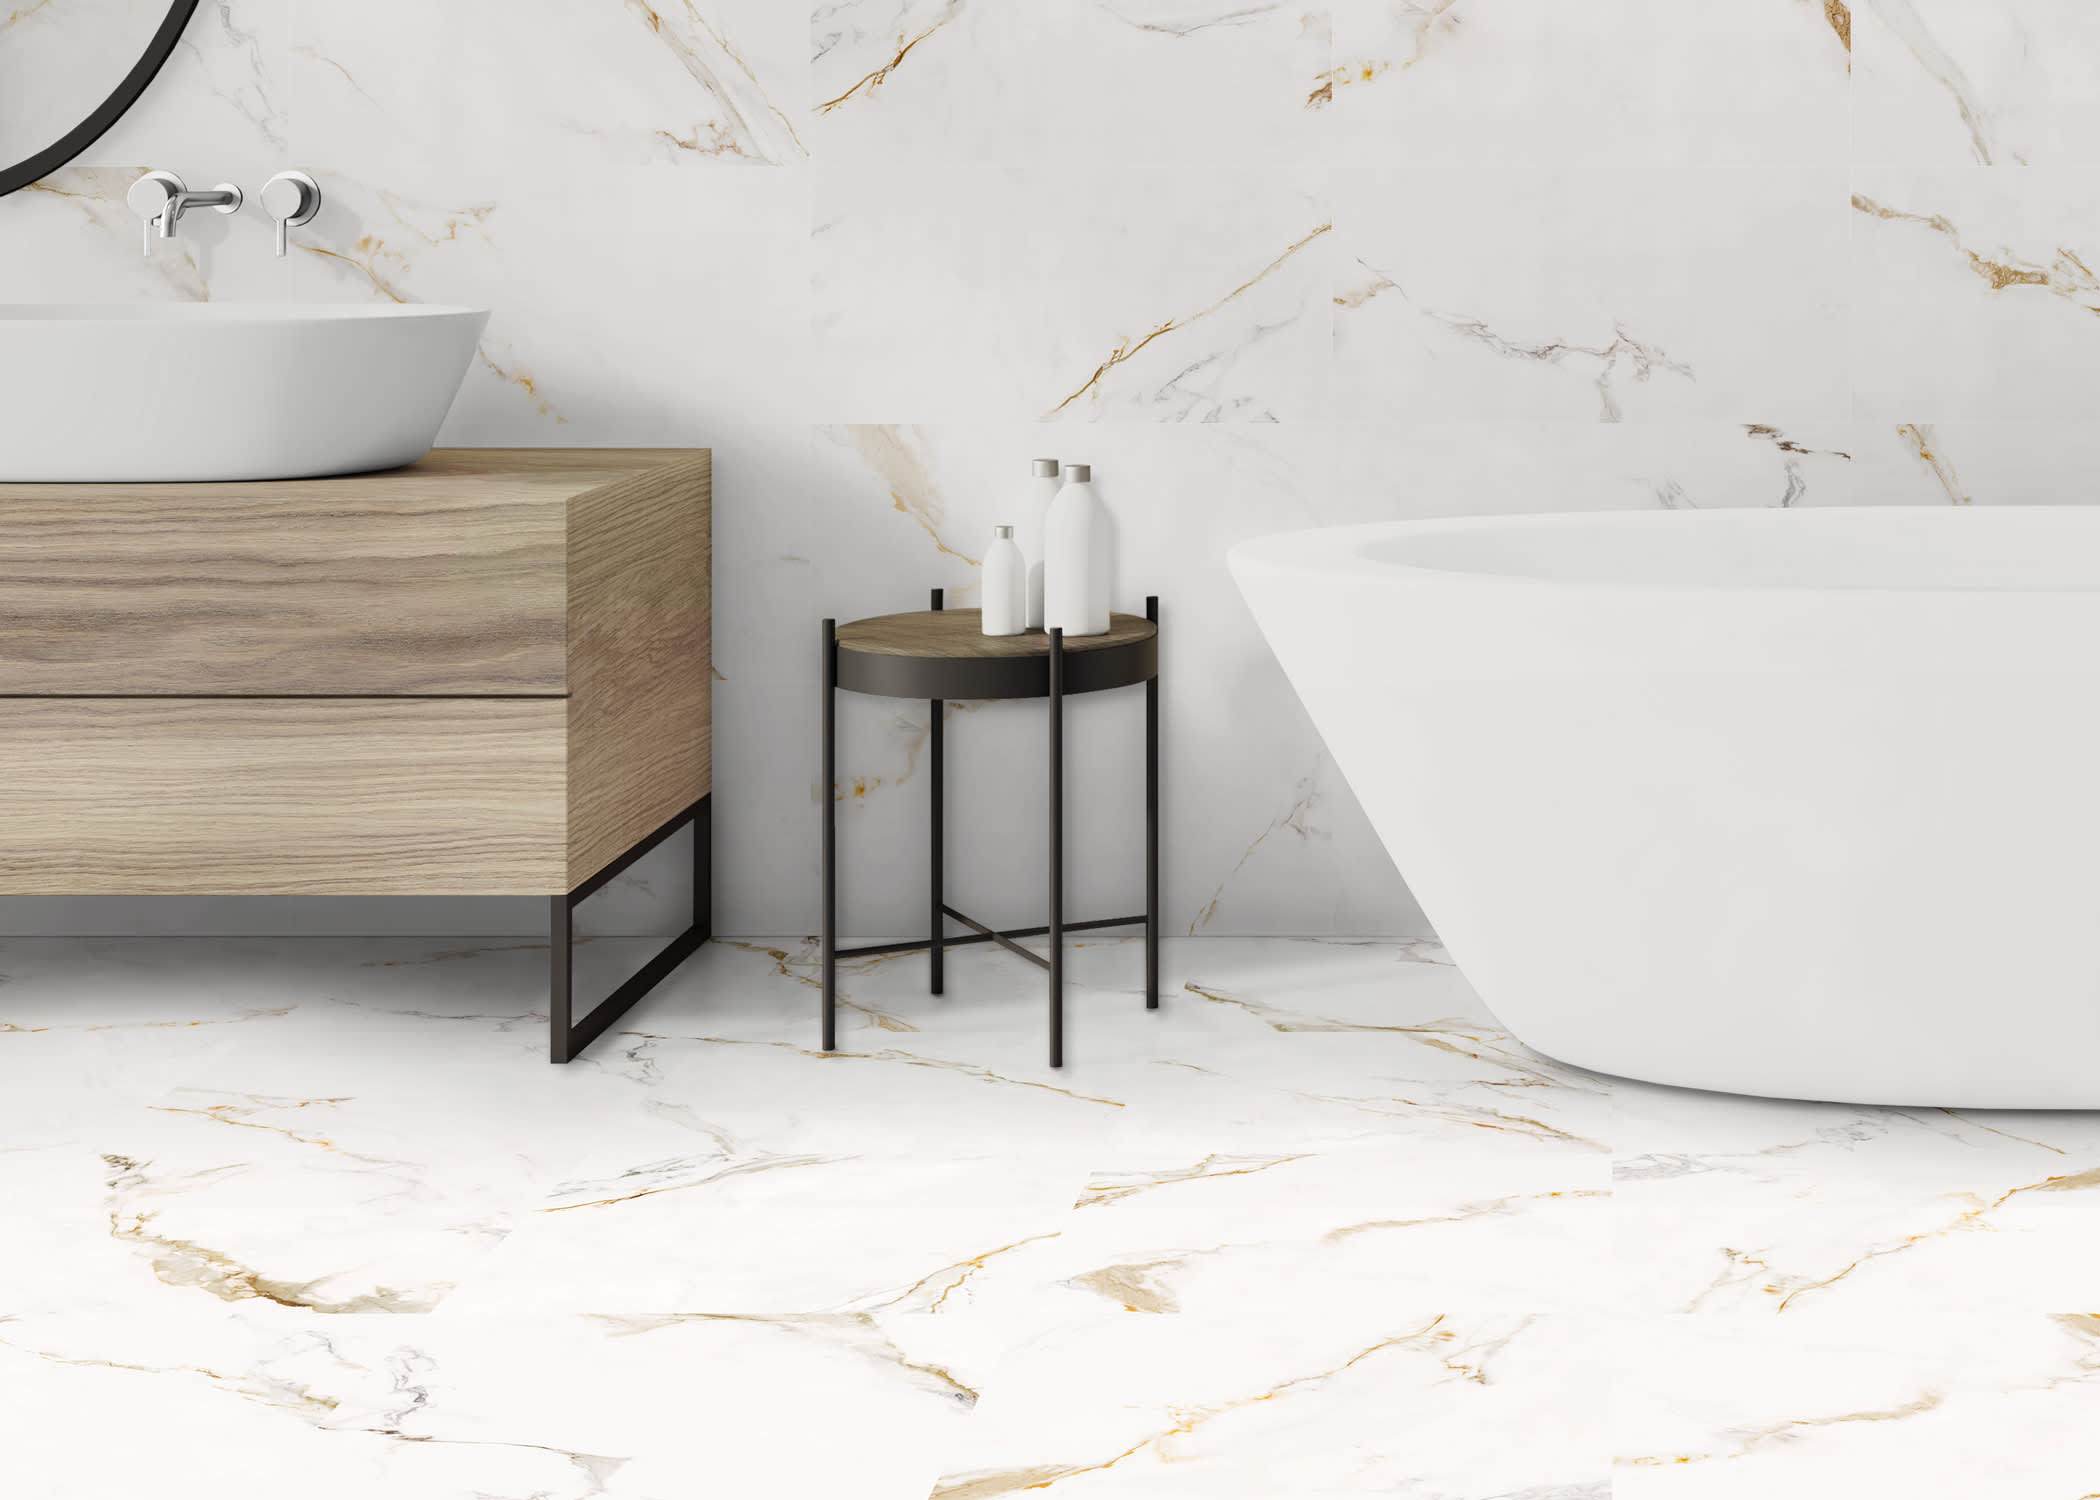 12 in. x 24 in. Marmo Imperiale Stone Look Porcelain Tile Flooring in bathroom with tile on floor and wall plus oval white freestanding tub and light wood vanity with vessel sink